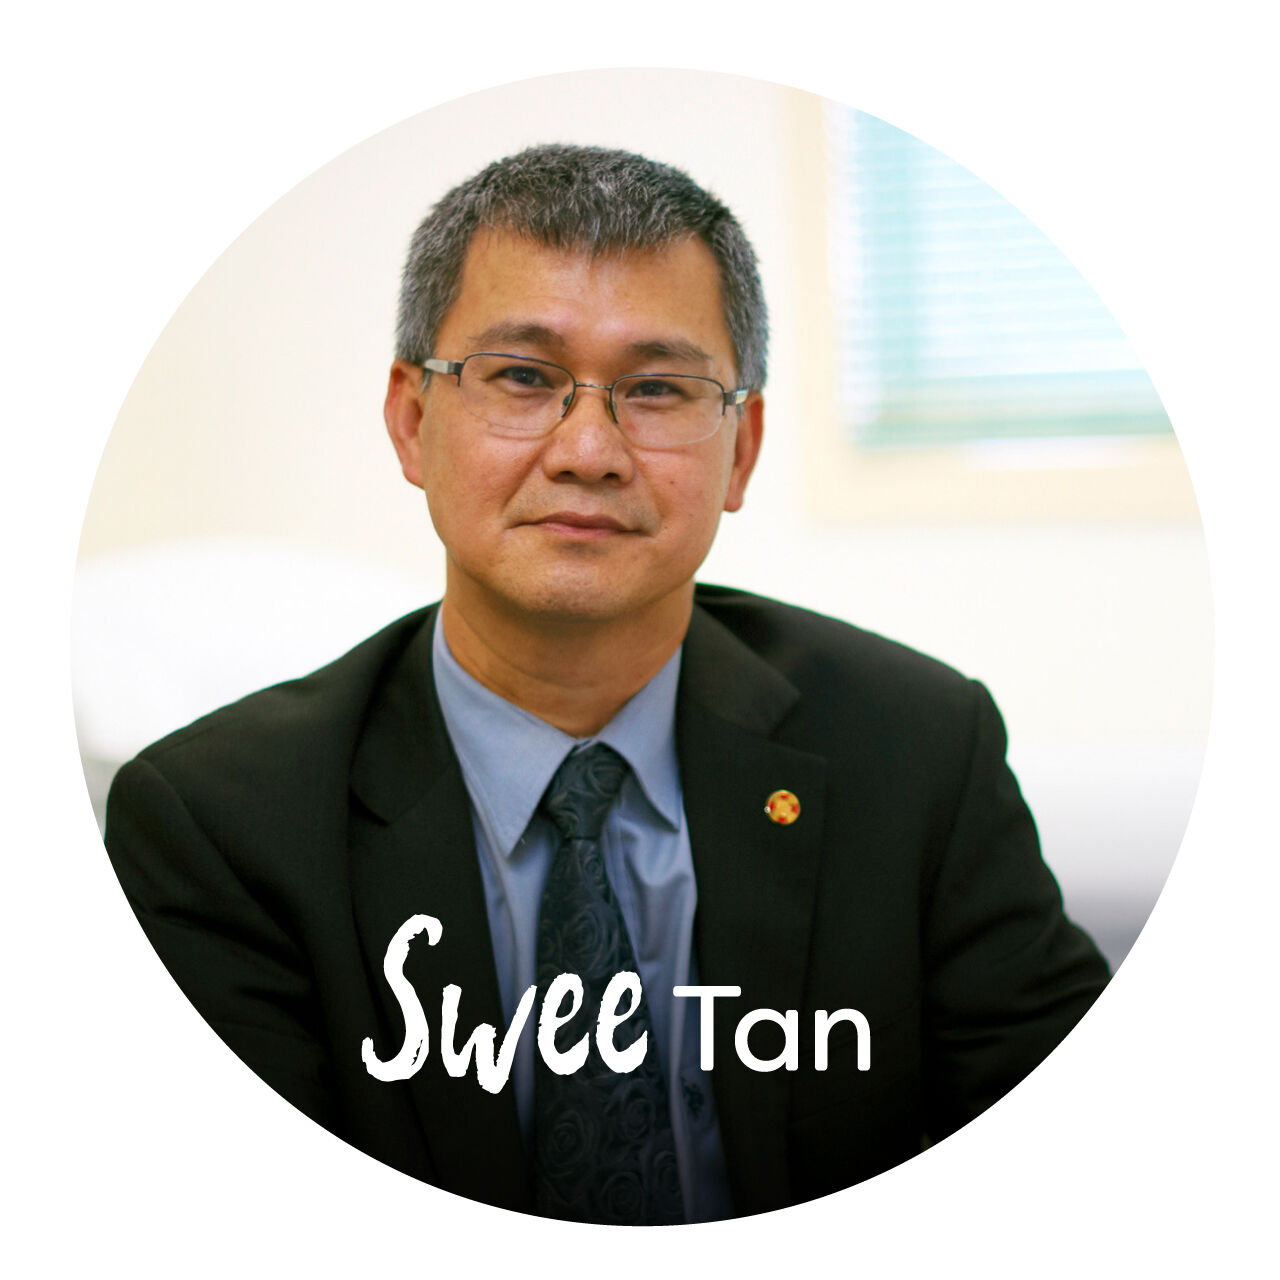 A picture of Swee Tan